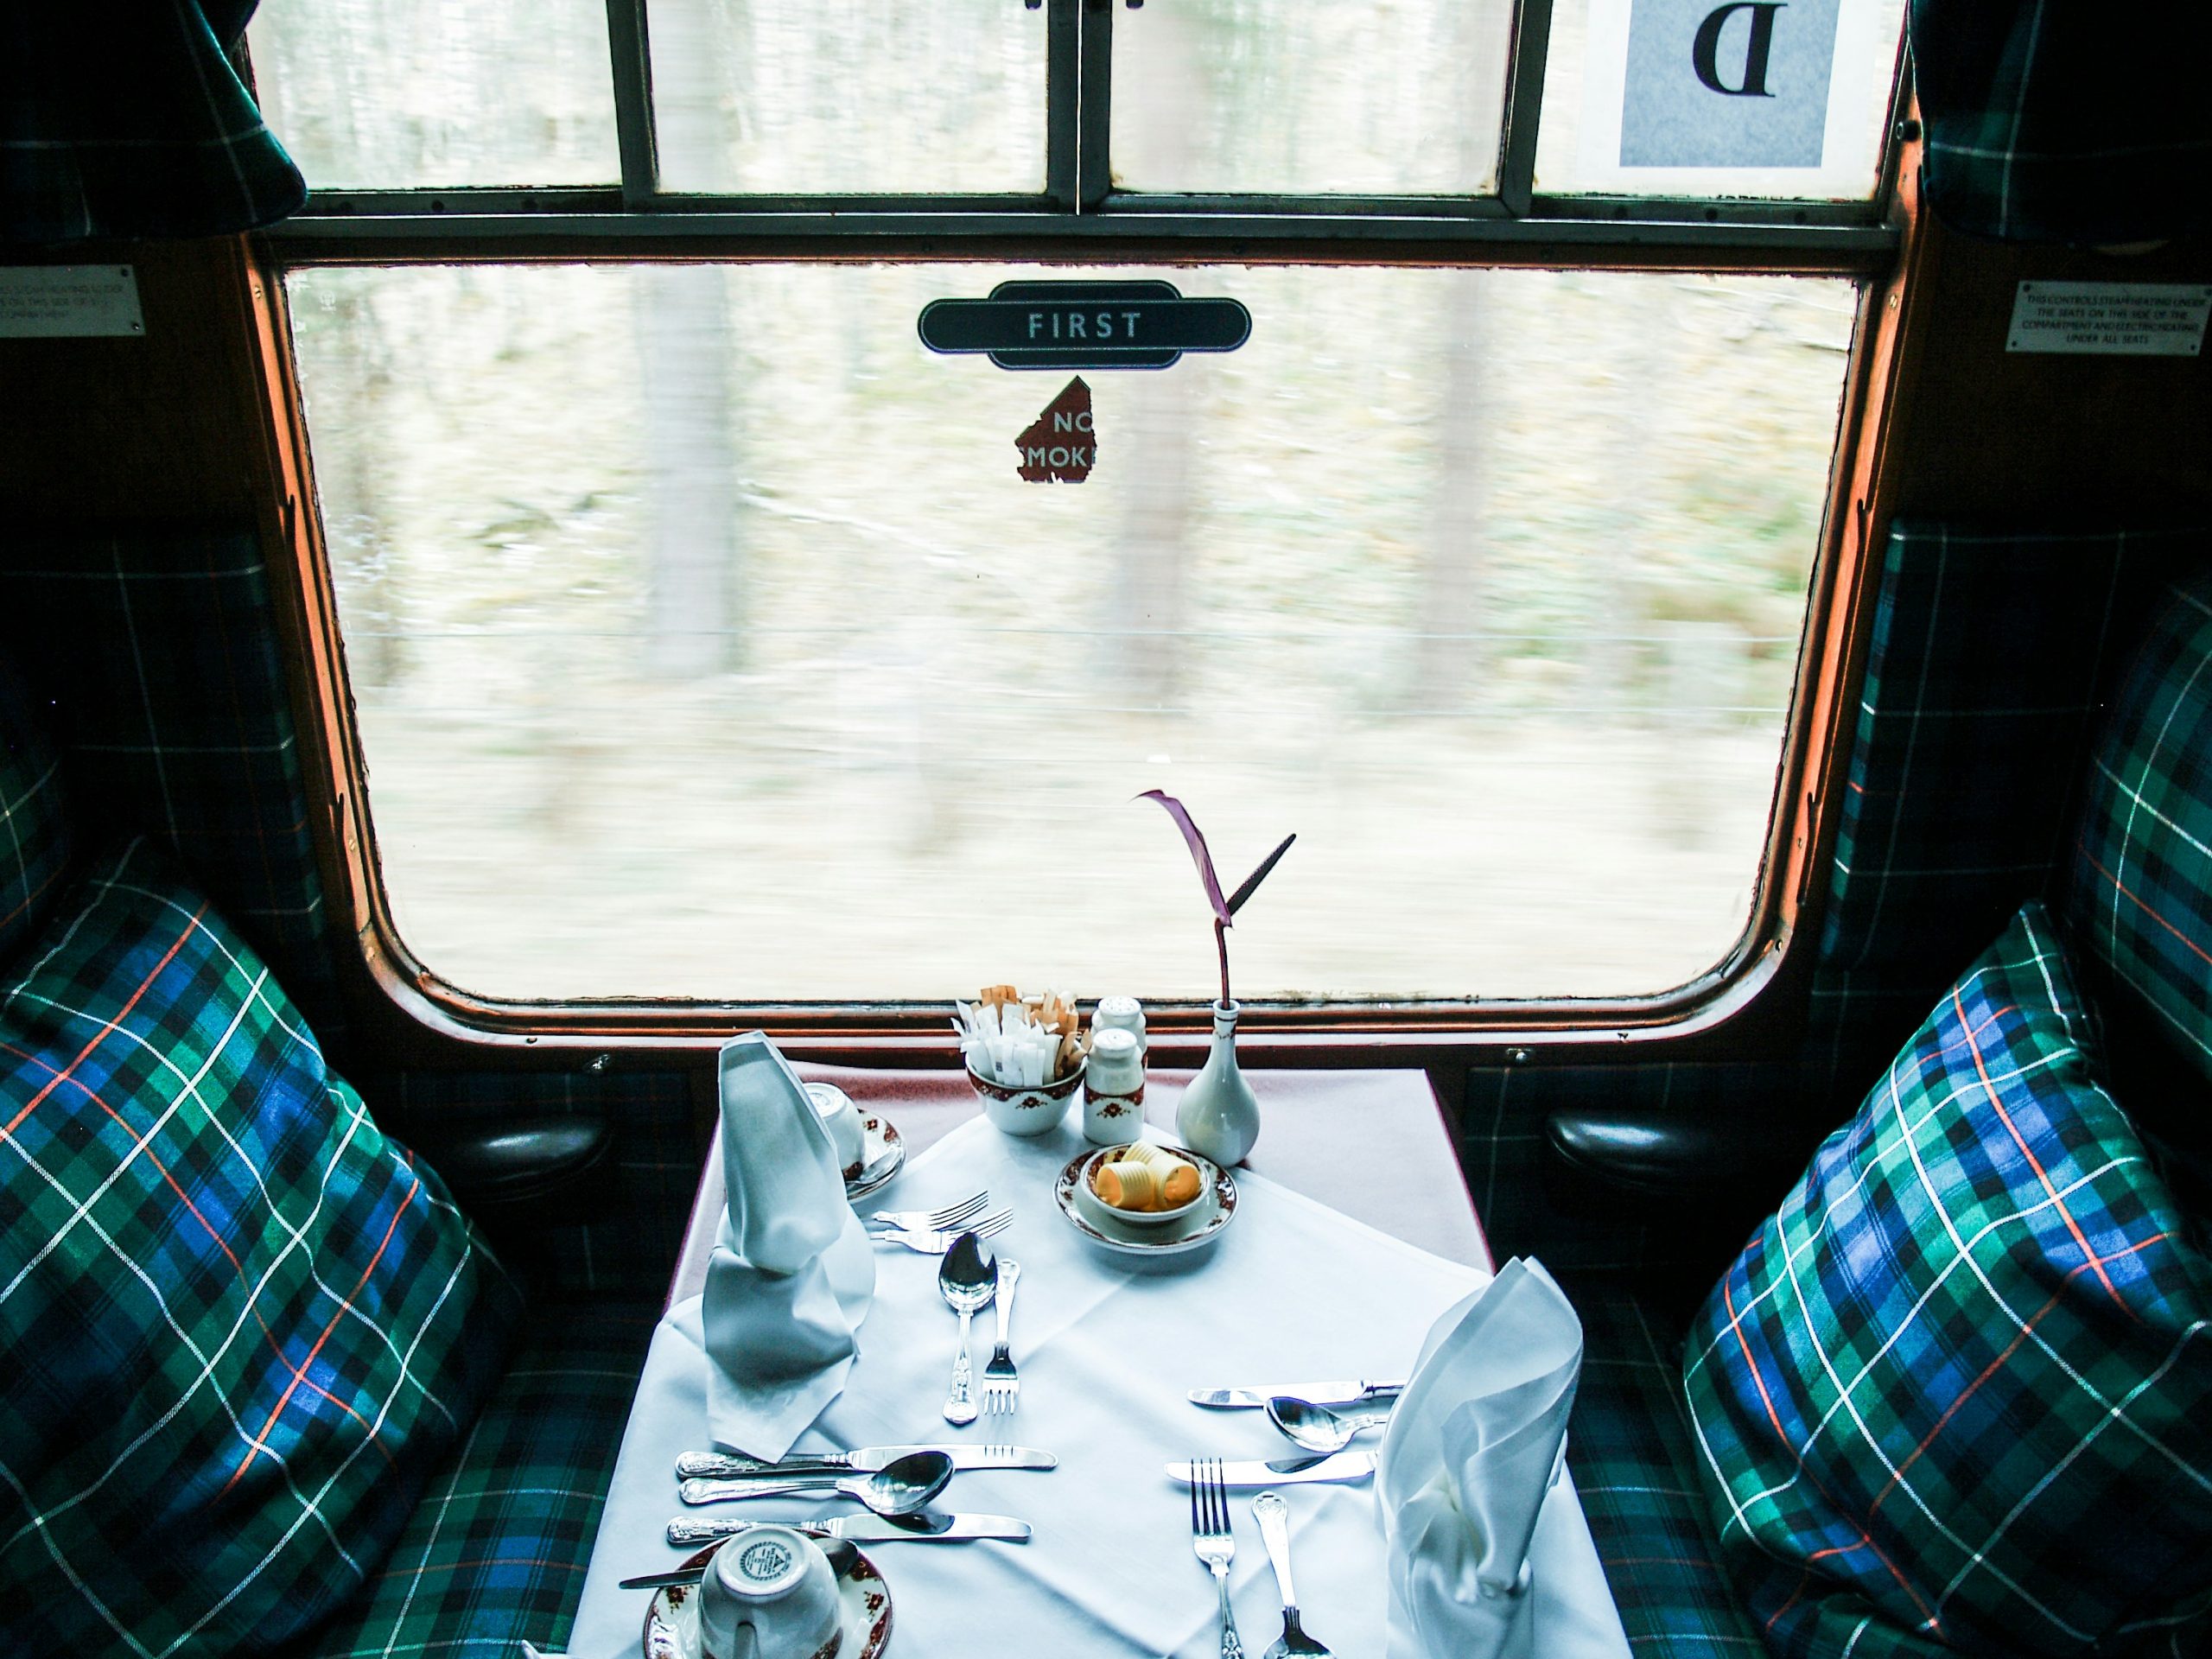 explore the world in style on luxury trains, experience unparalleled service and luxury travel on board these iconic trains.